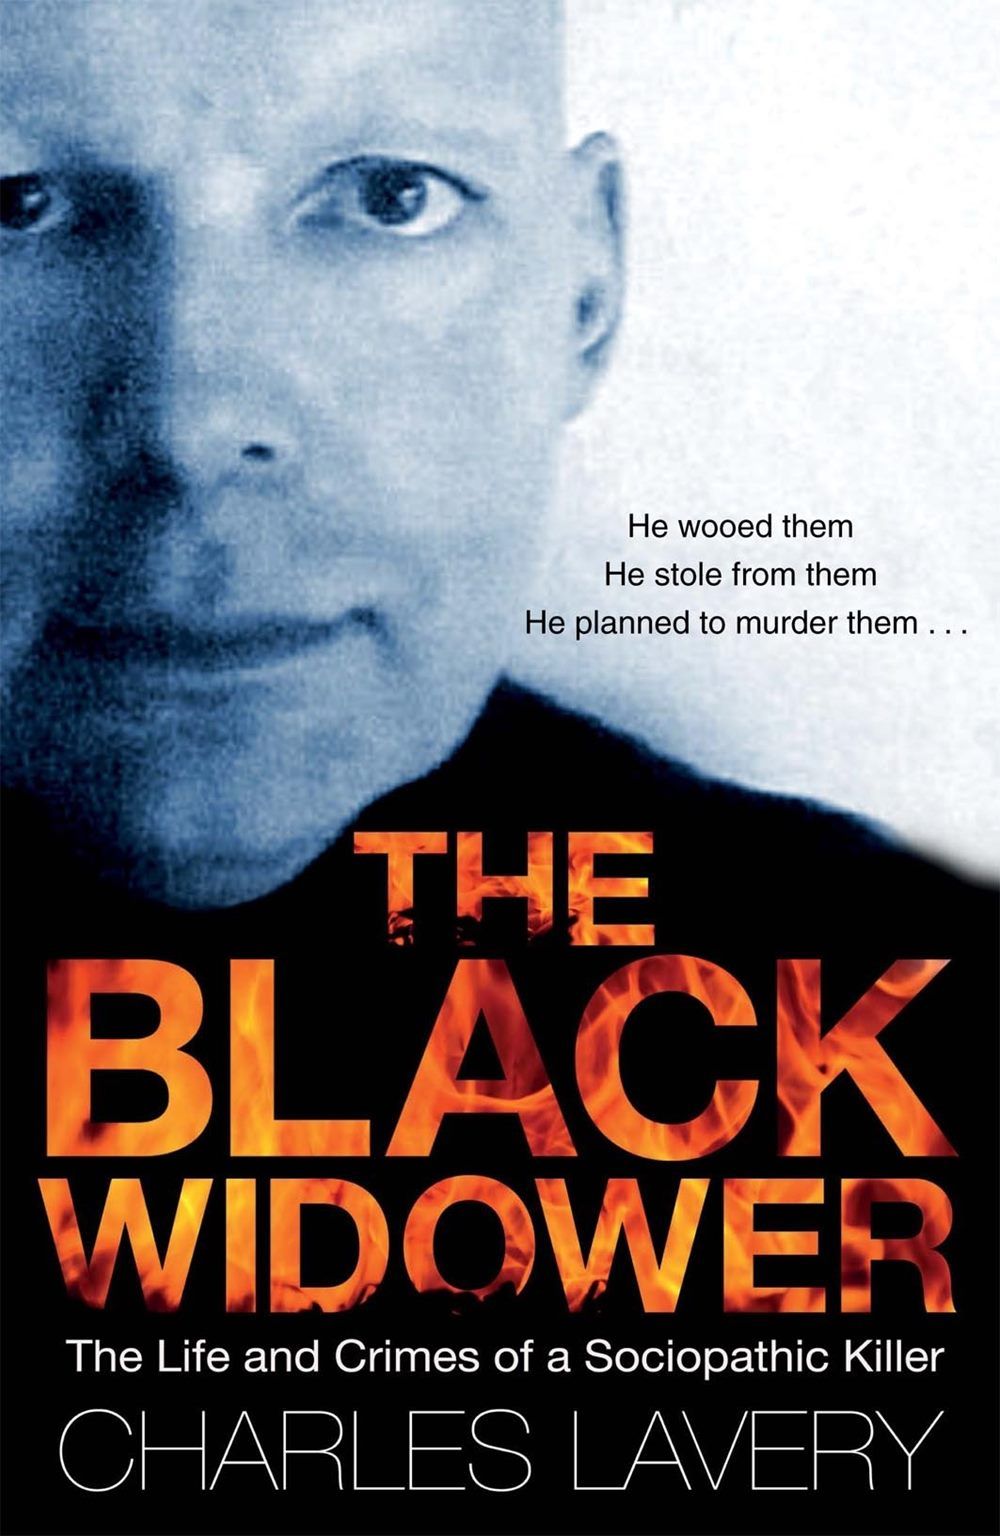 The Black Widower: The Life and Crimes of a Sociopathic Killer